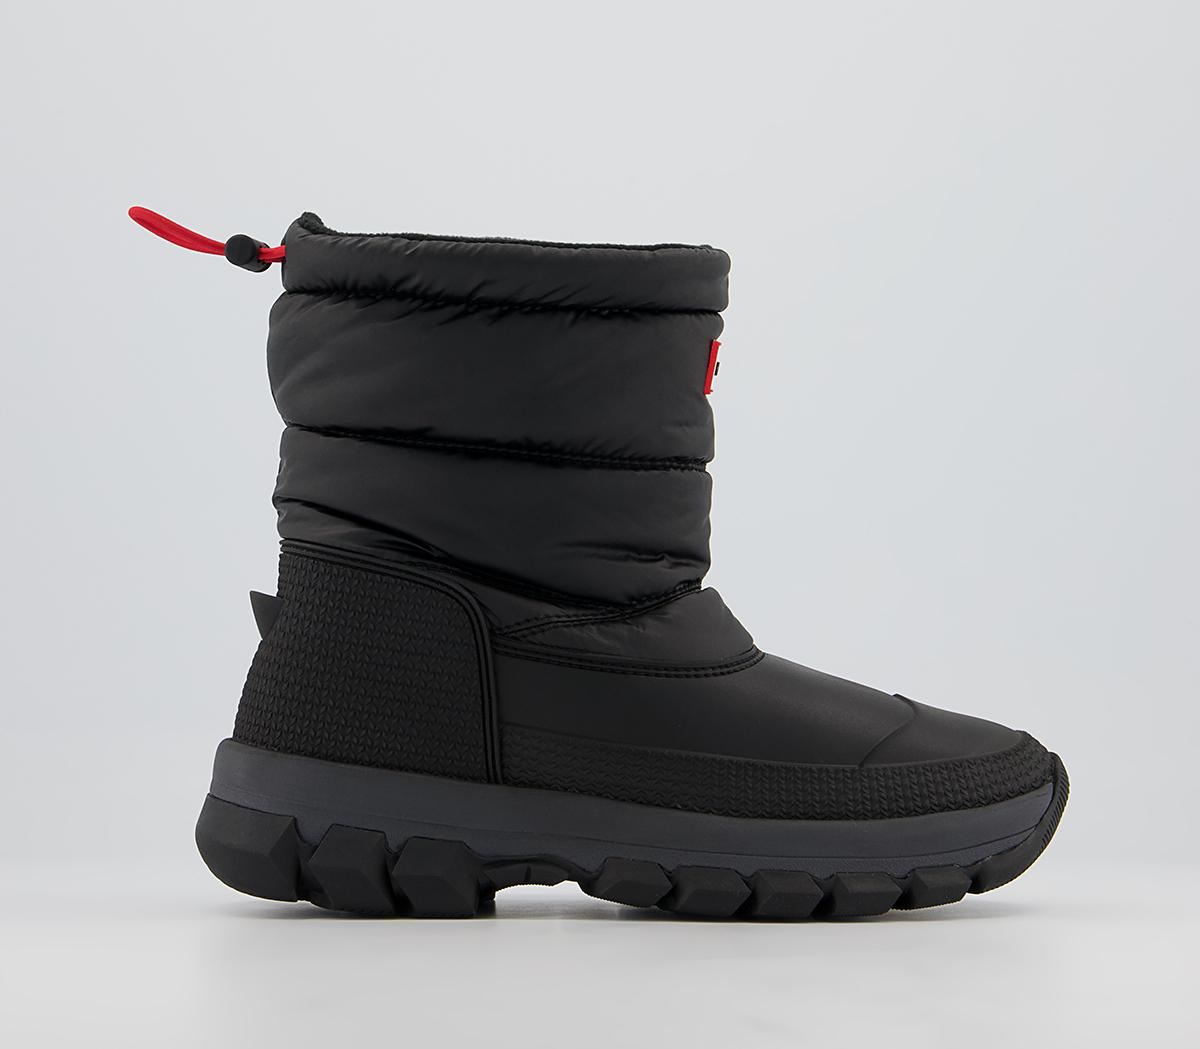 Hunter Original Insulated Snow Boots Black - Online Exclusives